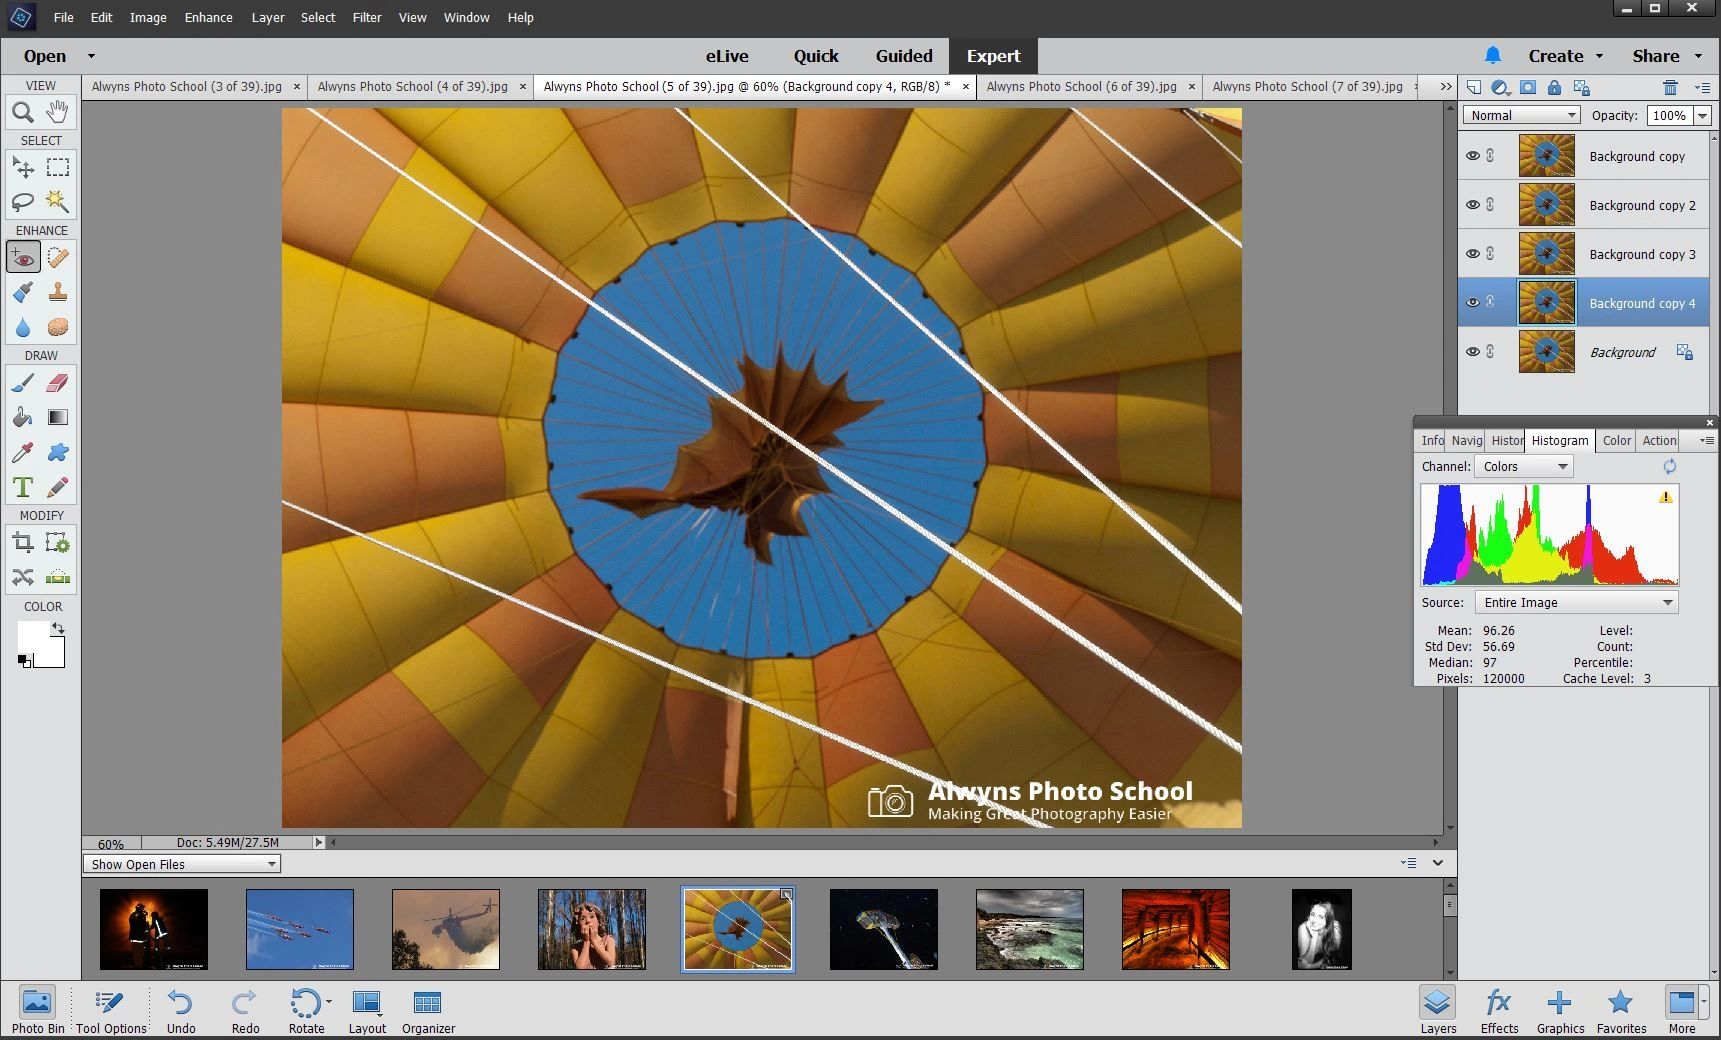 Photography Software course 22 Photoshop Elements Introduction by Alwyns Photo School Melbourne